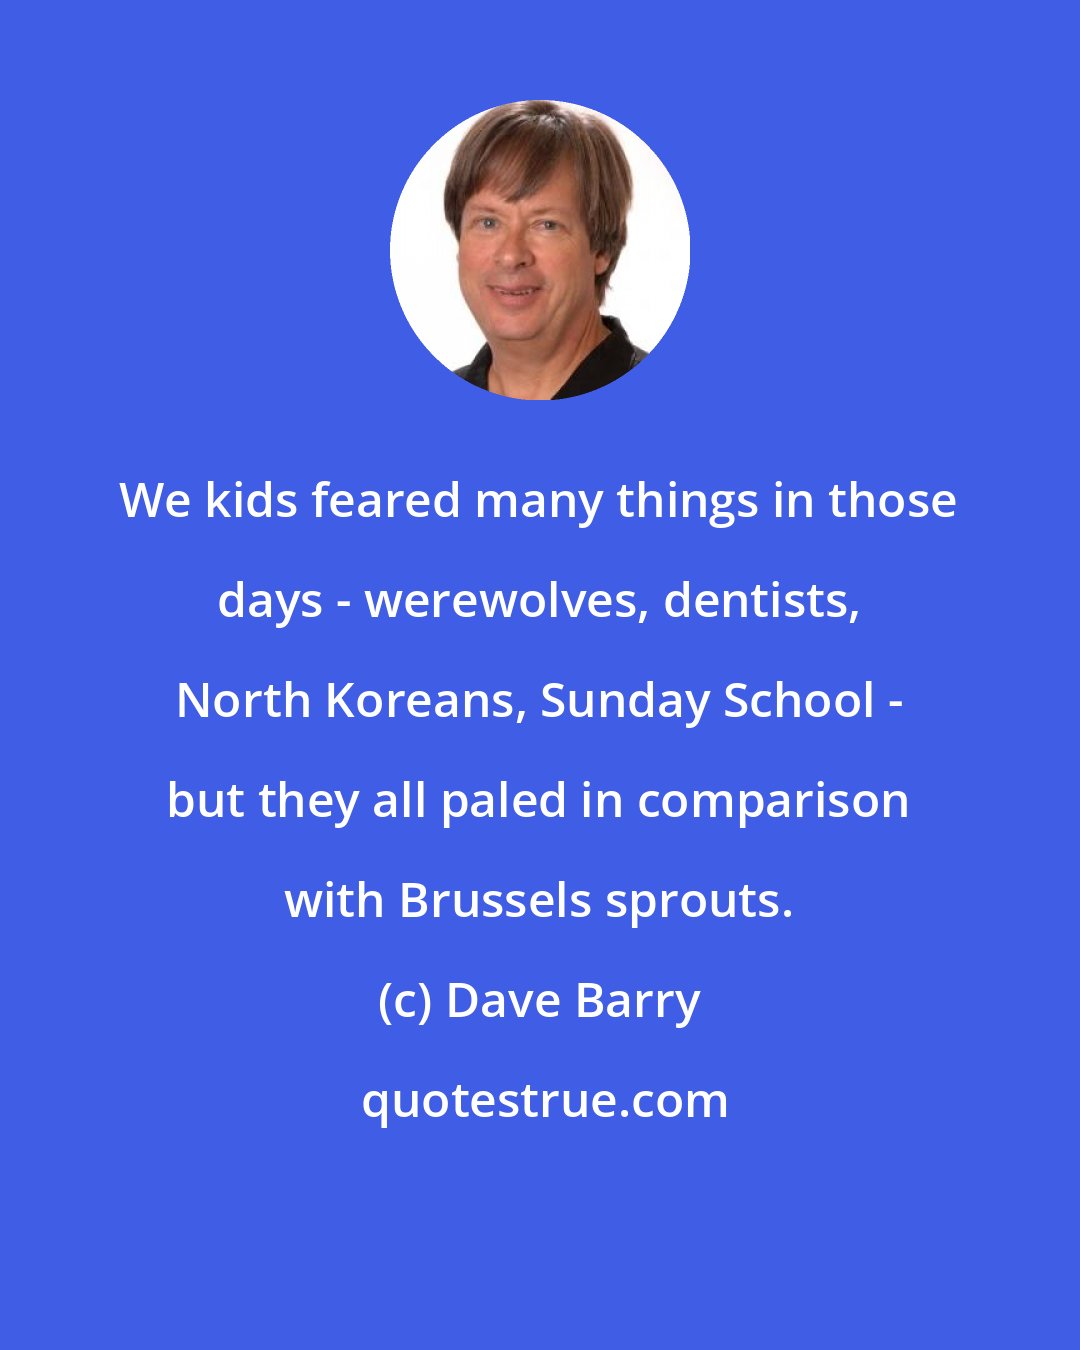 Dave Barry: We kids feared many things in those days - werewolves, dentists, North Koreans, Sunday School - but they all paled in comparison with Brussels sprouts.